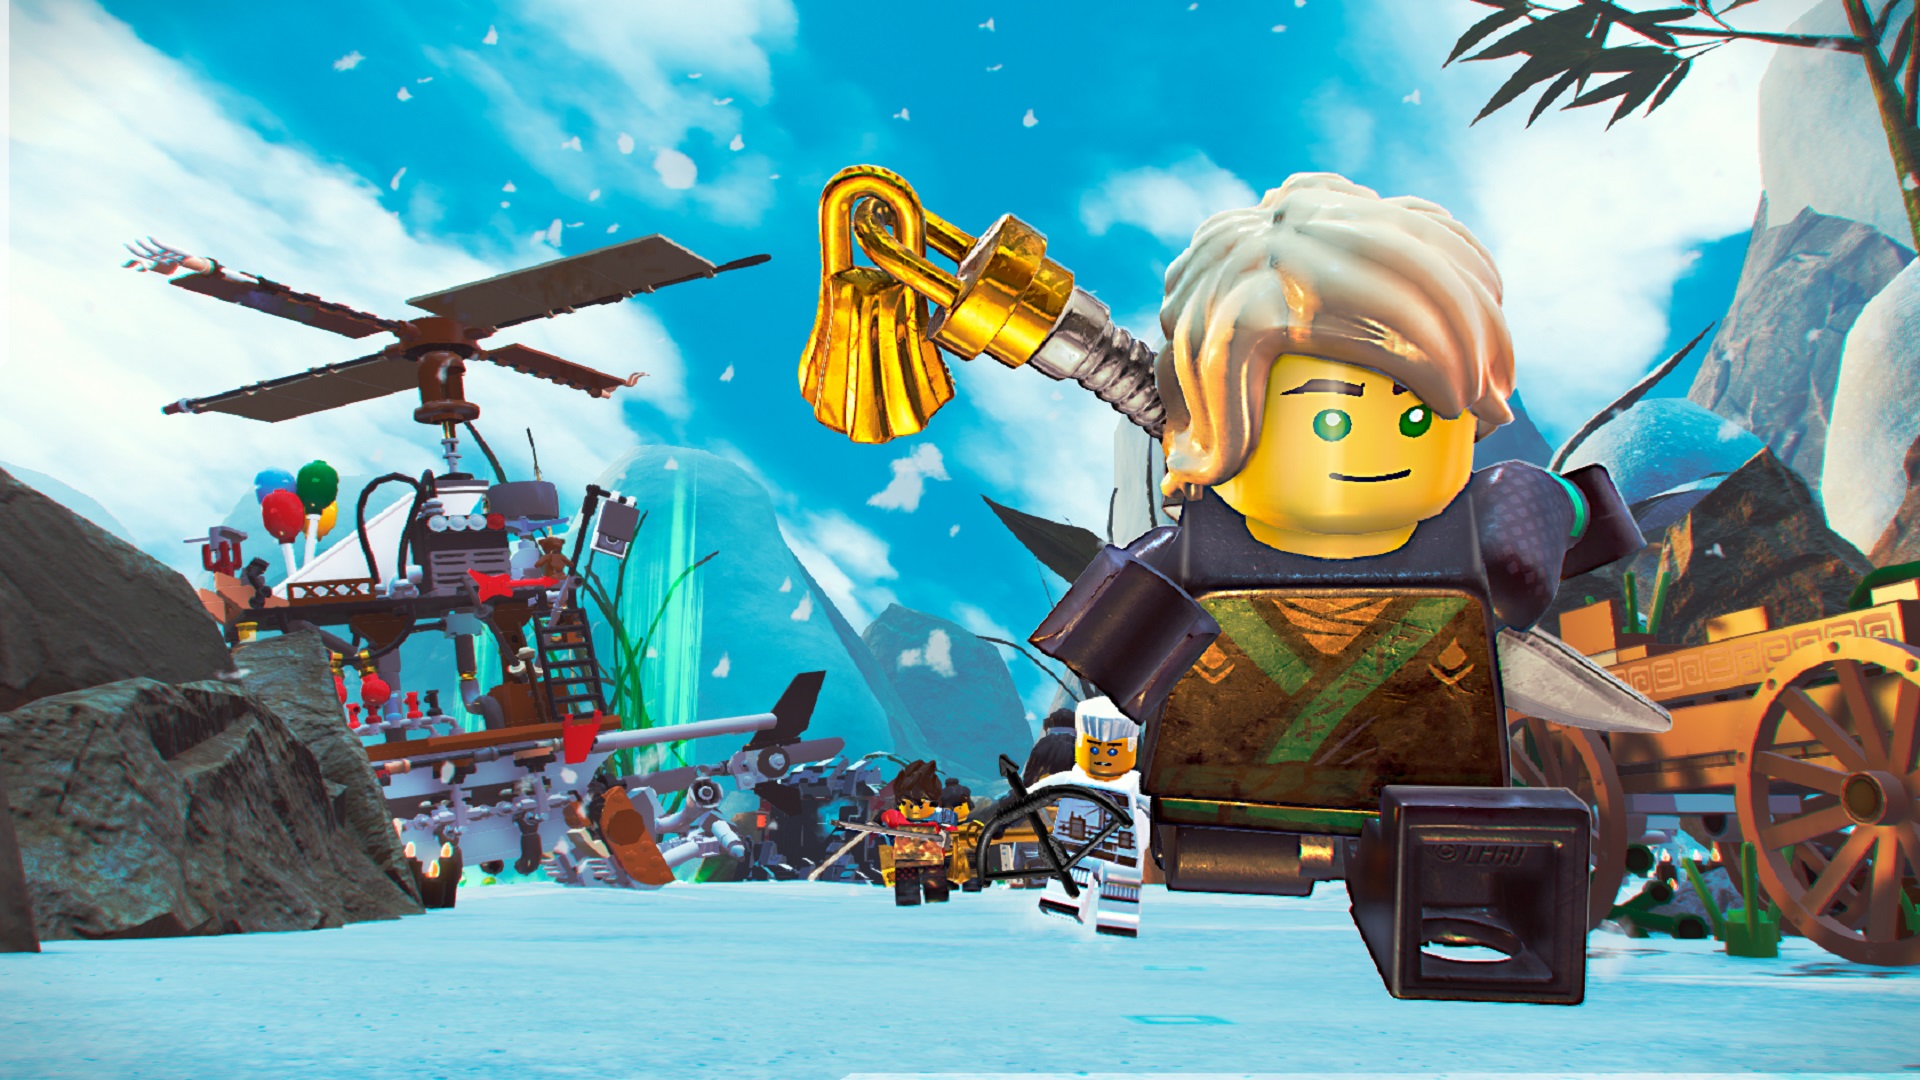 Free games: The Lego Ninjago Movie game is free right now on PCGamesN